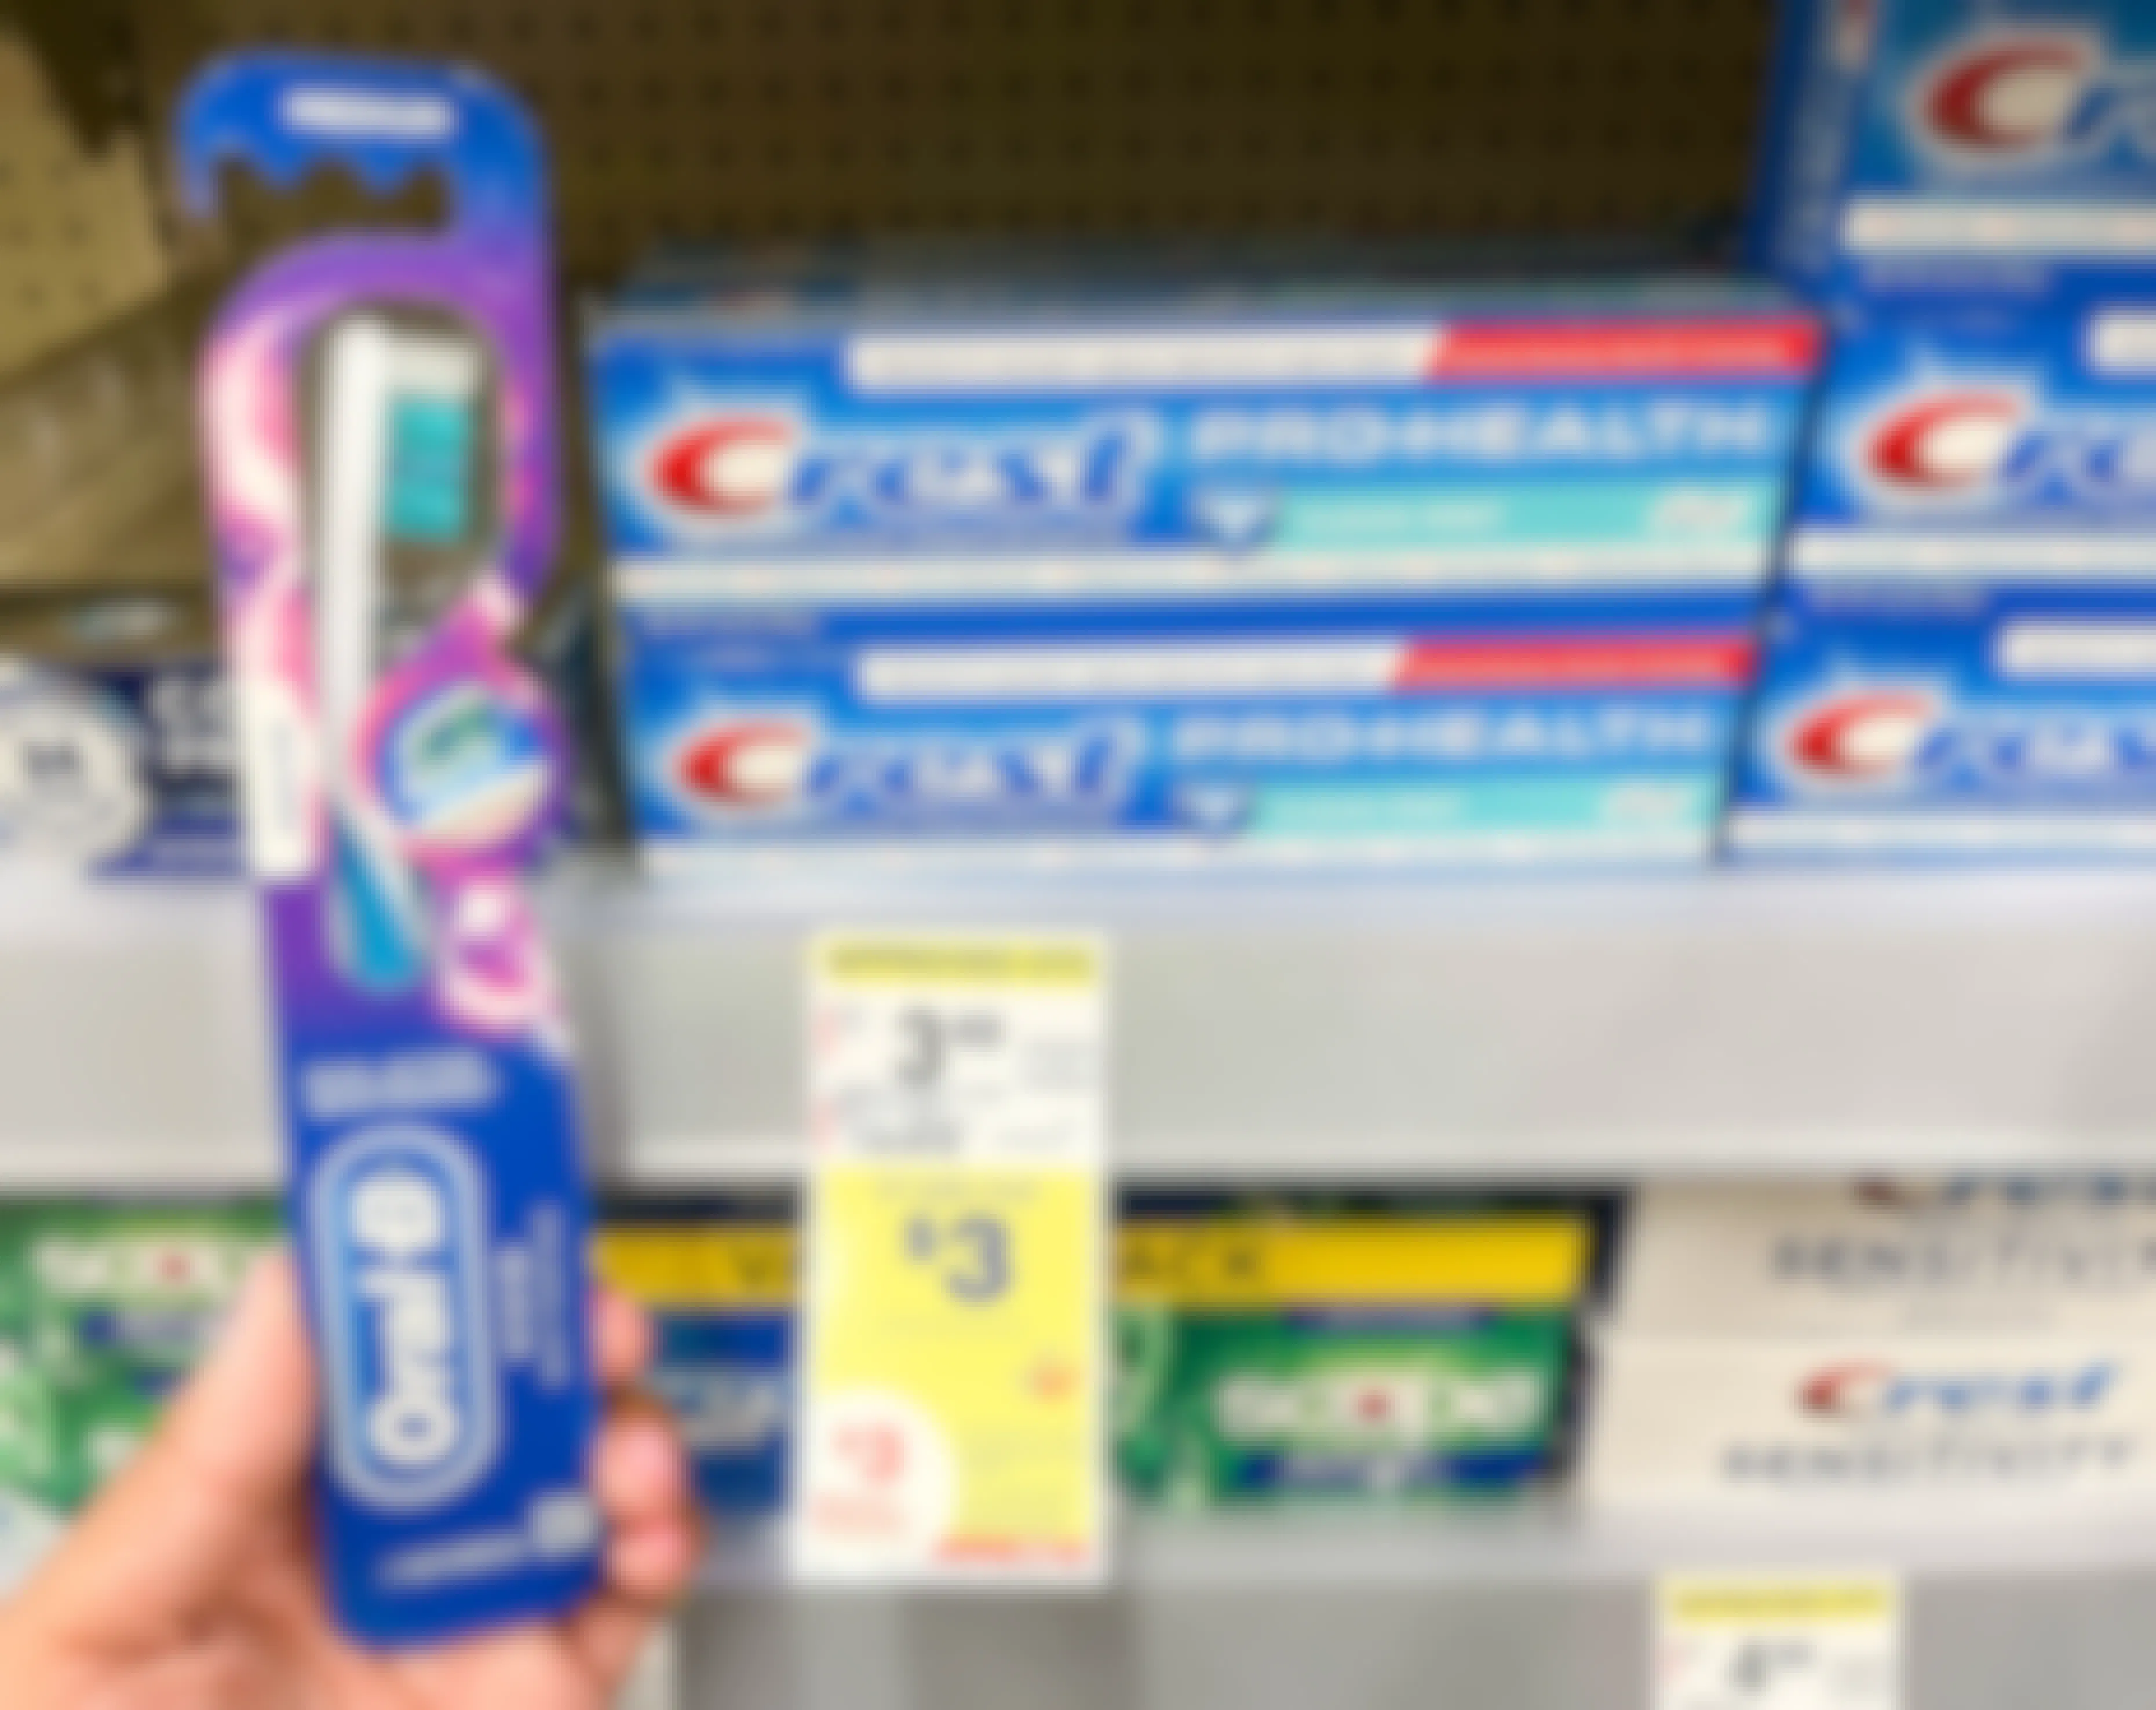 A person holding an oral-b toothbrush next to a shelf holding crest pro-health toothpaste